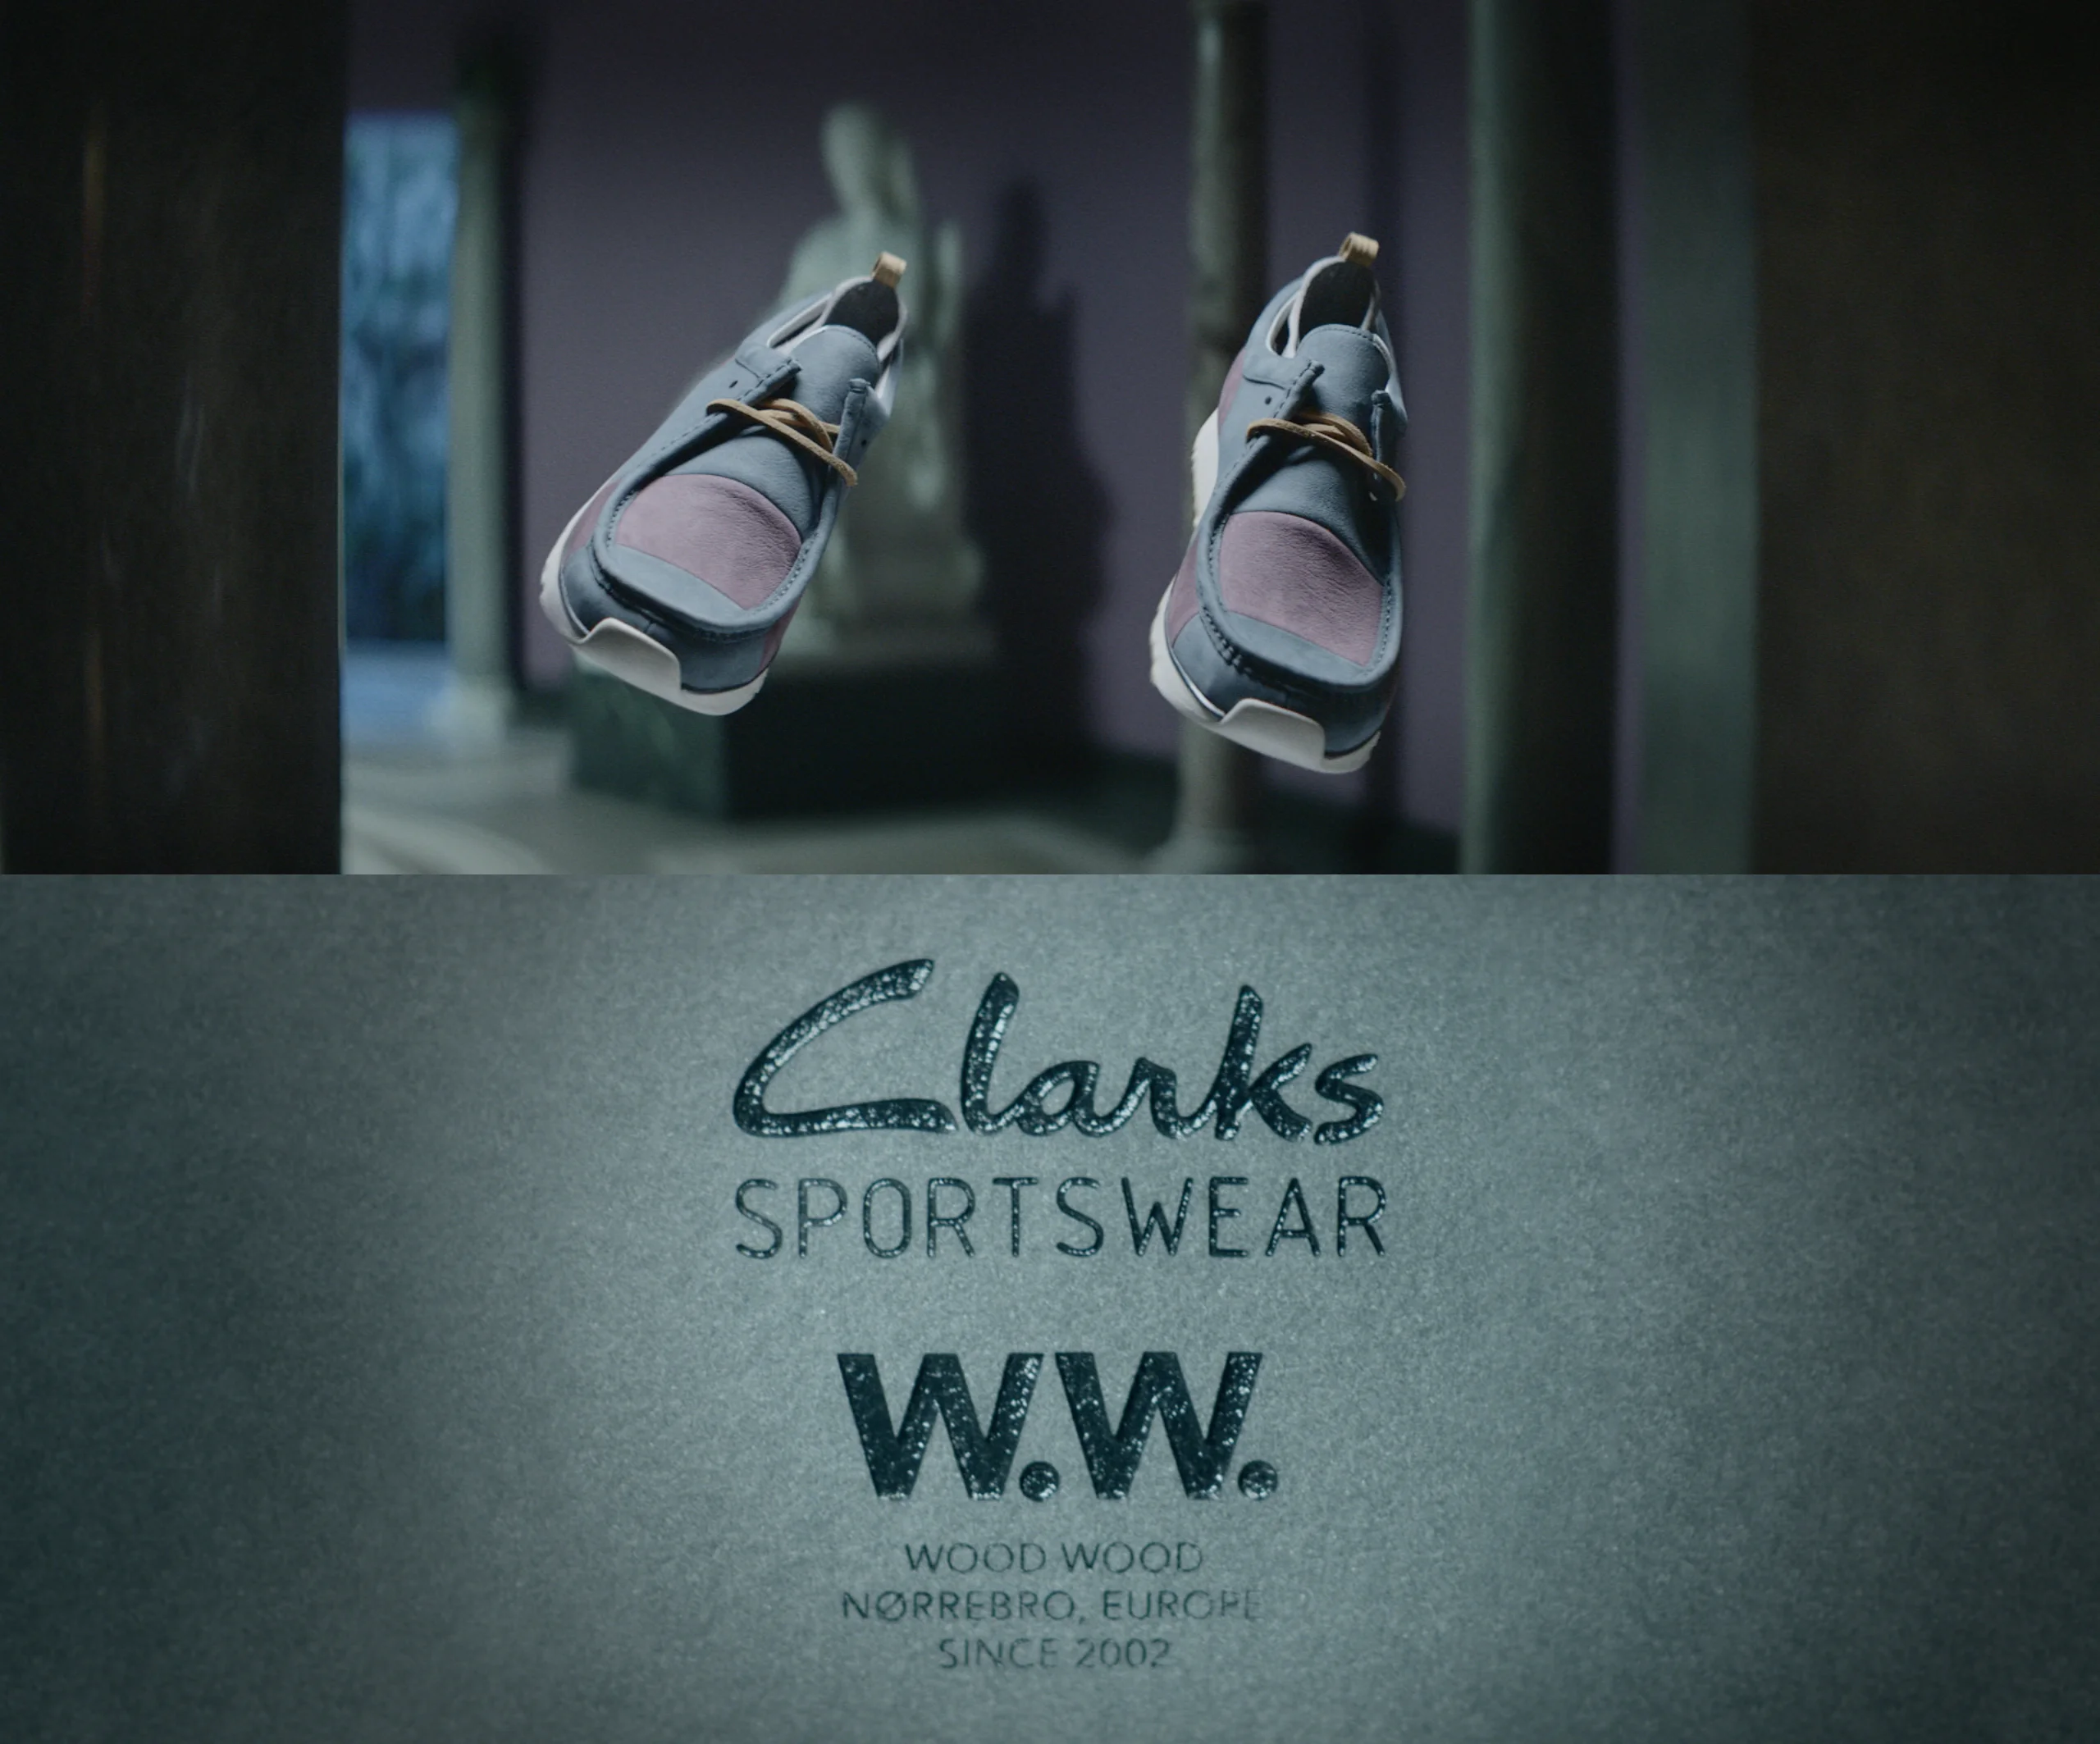 Clarks by Wood Wood [gamma] 3/3 on